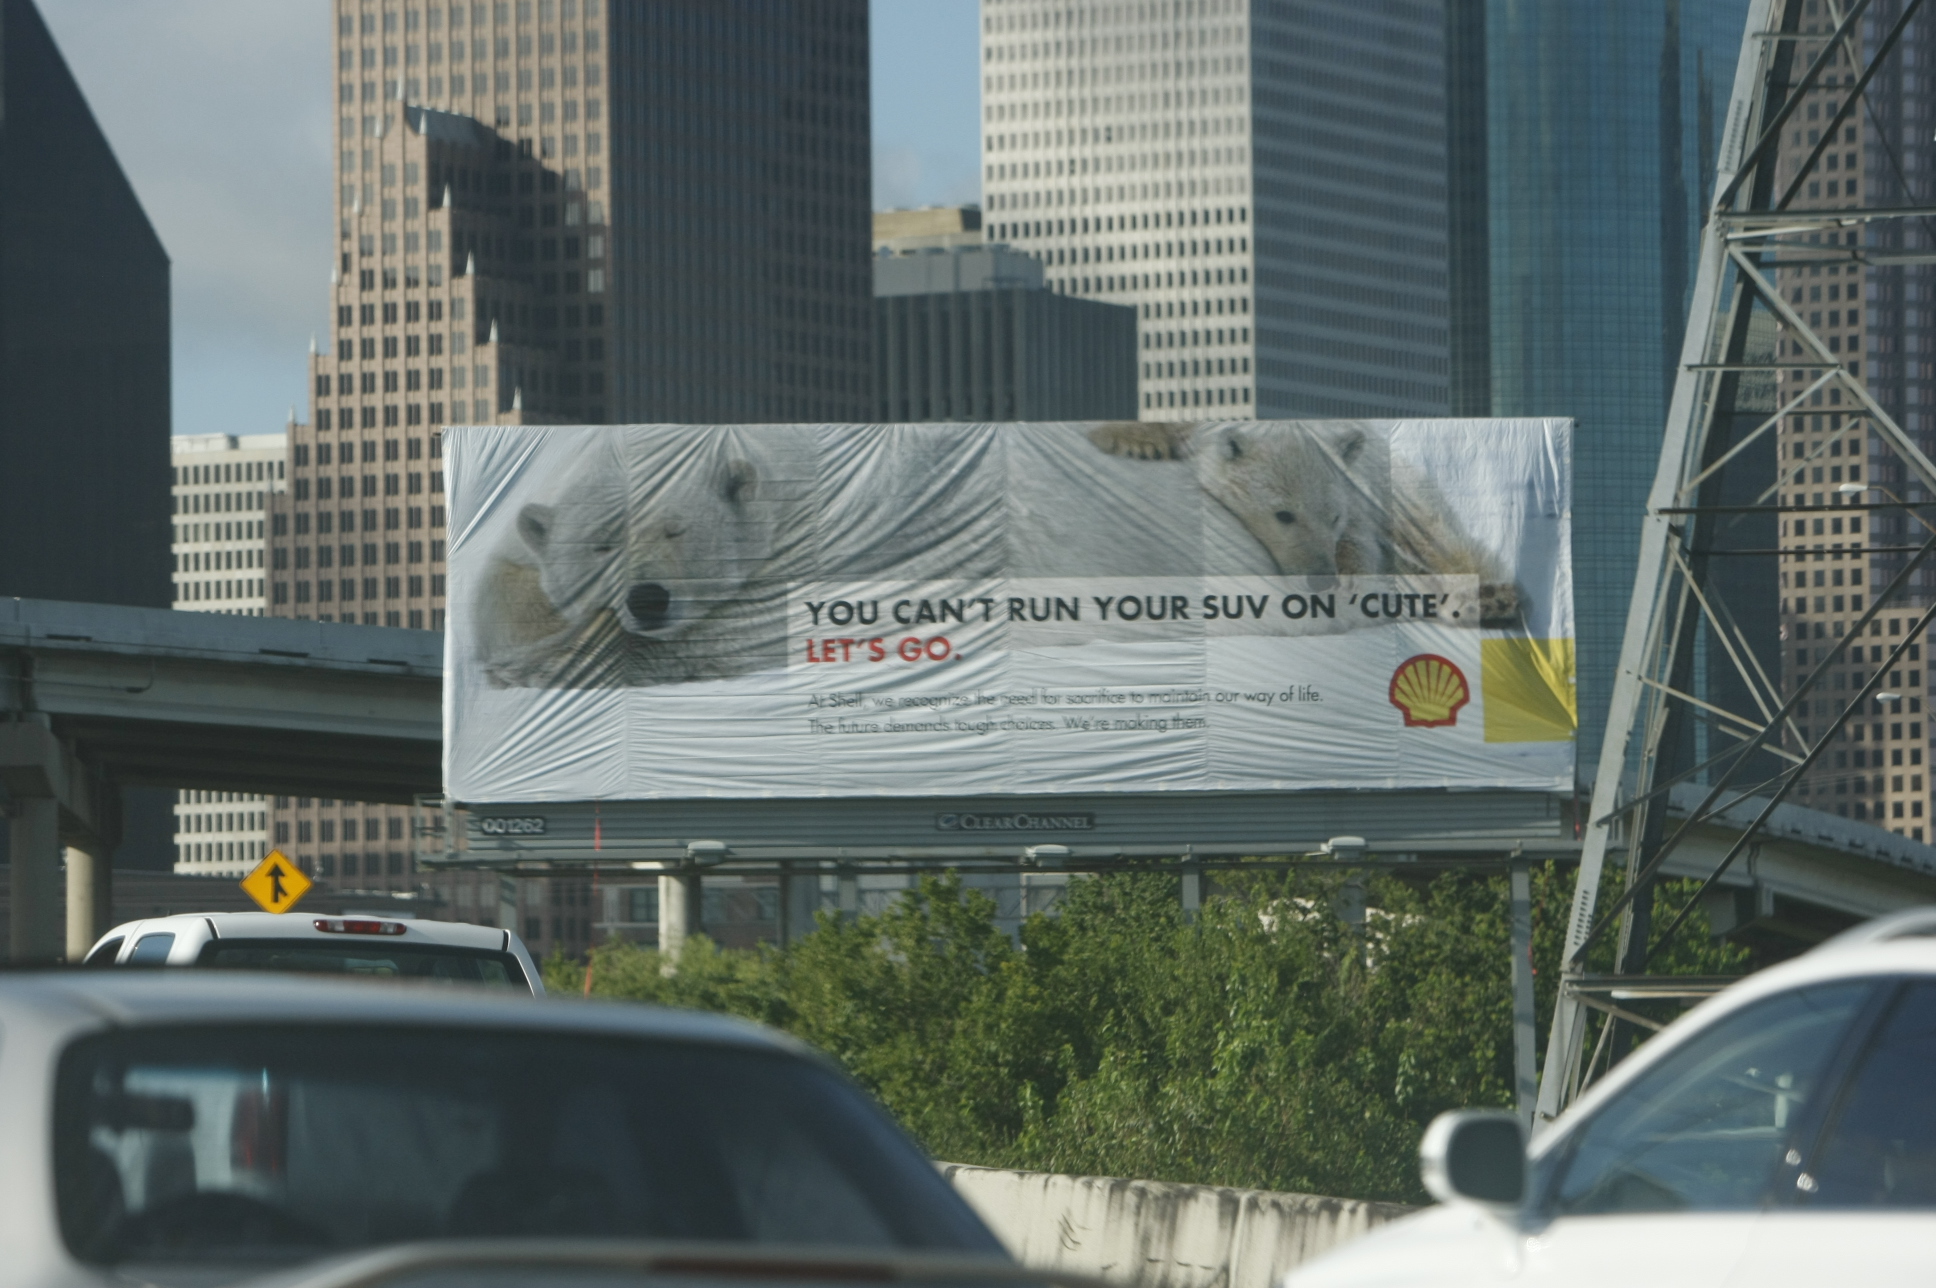 Greenpeace unveils billboard in Texas that spoofs Shell ad